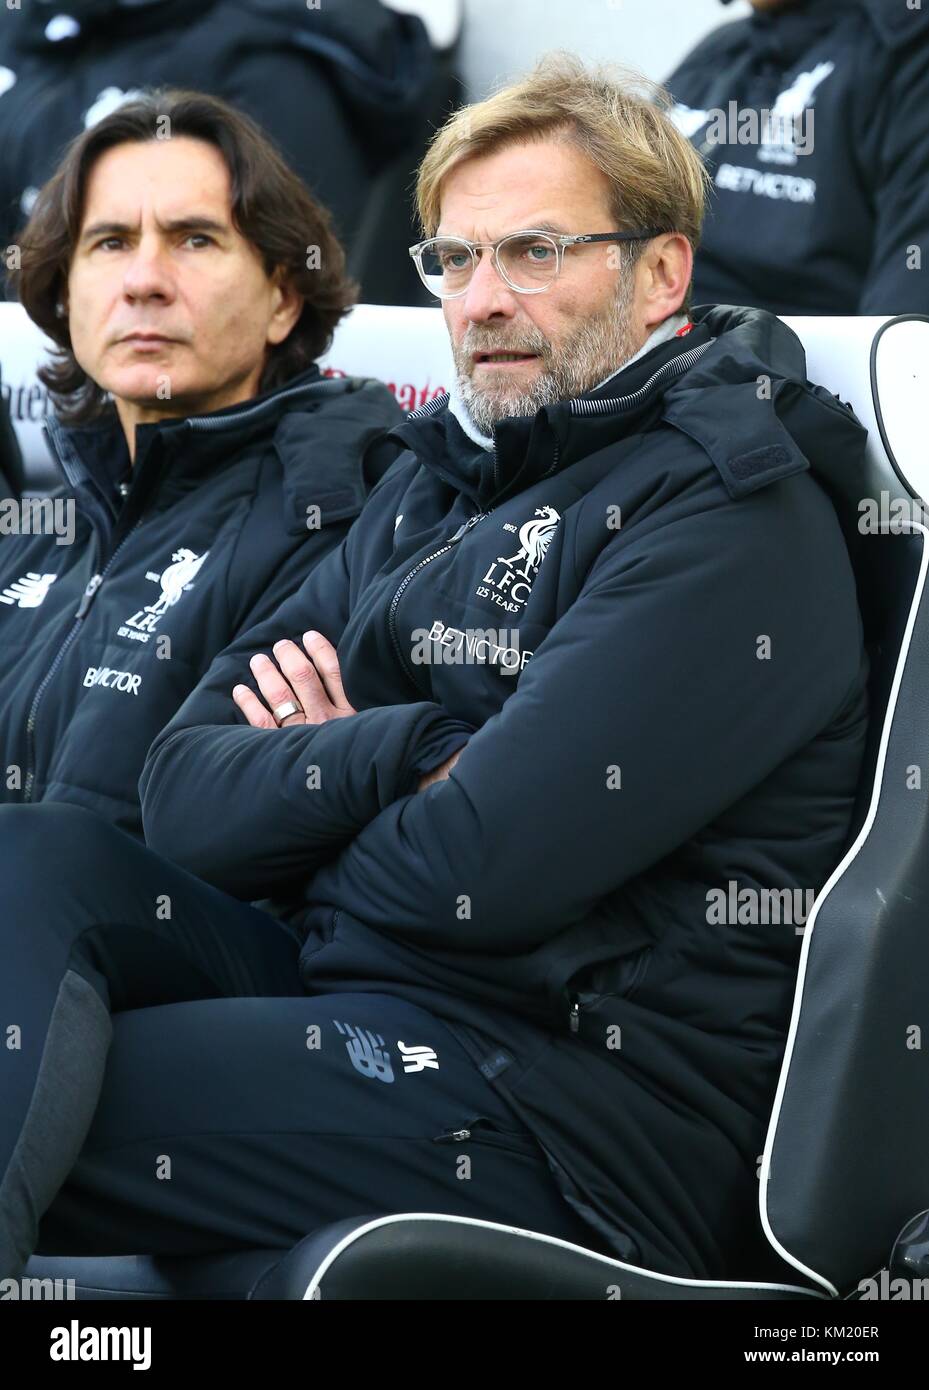 Liverpool manager Jurgen Klopp with assistant Željko Buvac  during the Premier League match between Brighton and Hove Albion and Liverpool at the American Express Community Stadium in Brighton and Hove. 02 Dec 2017 *** EDITORIAL USE ONLY *** FA Premier League and Football League images are subject to DataCo Licence see www.football-dataco.com Stock Photo